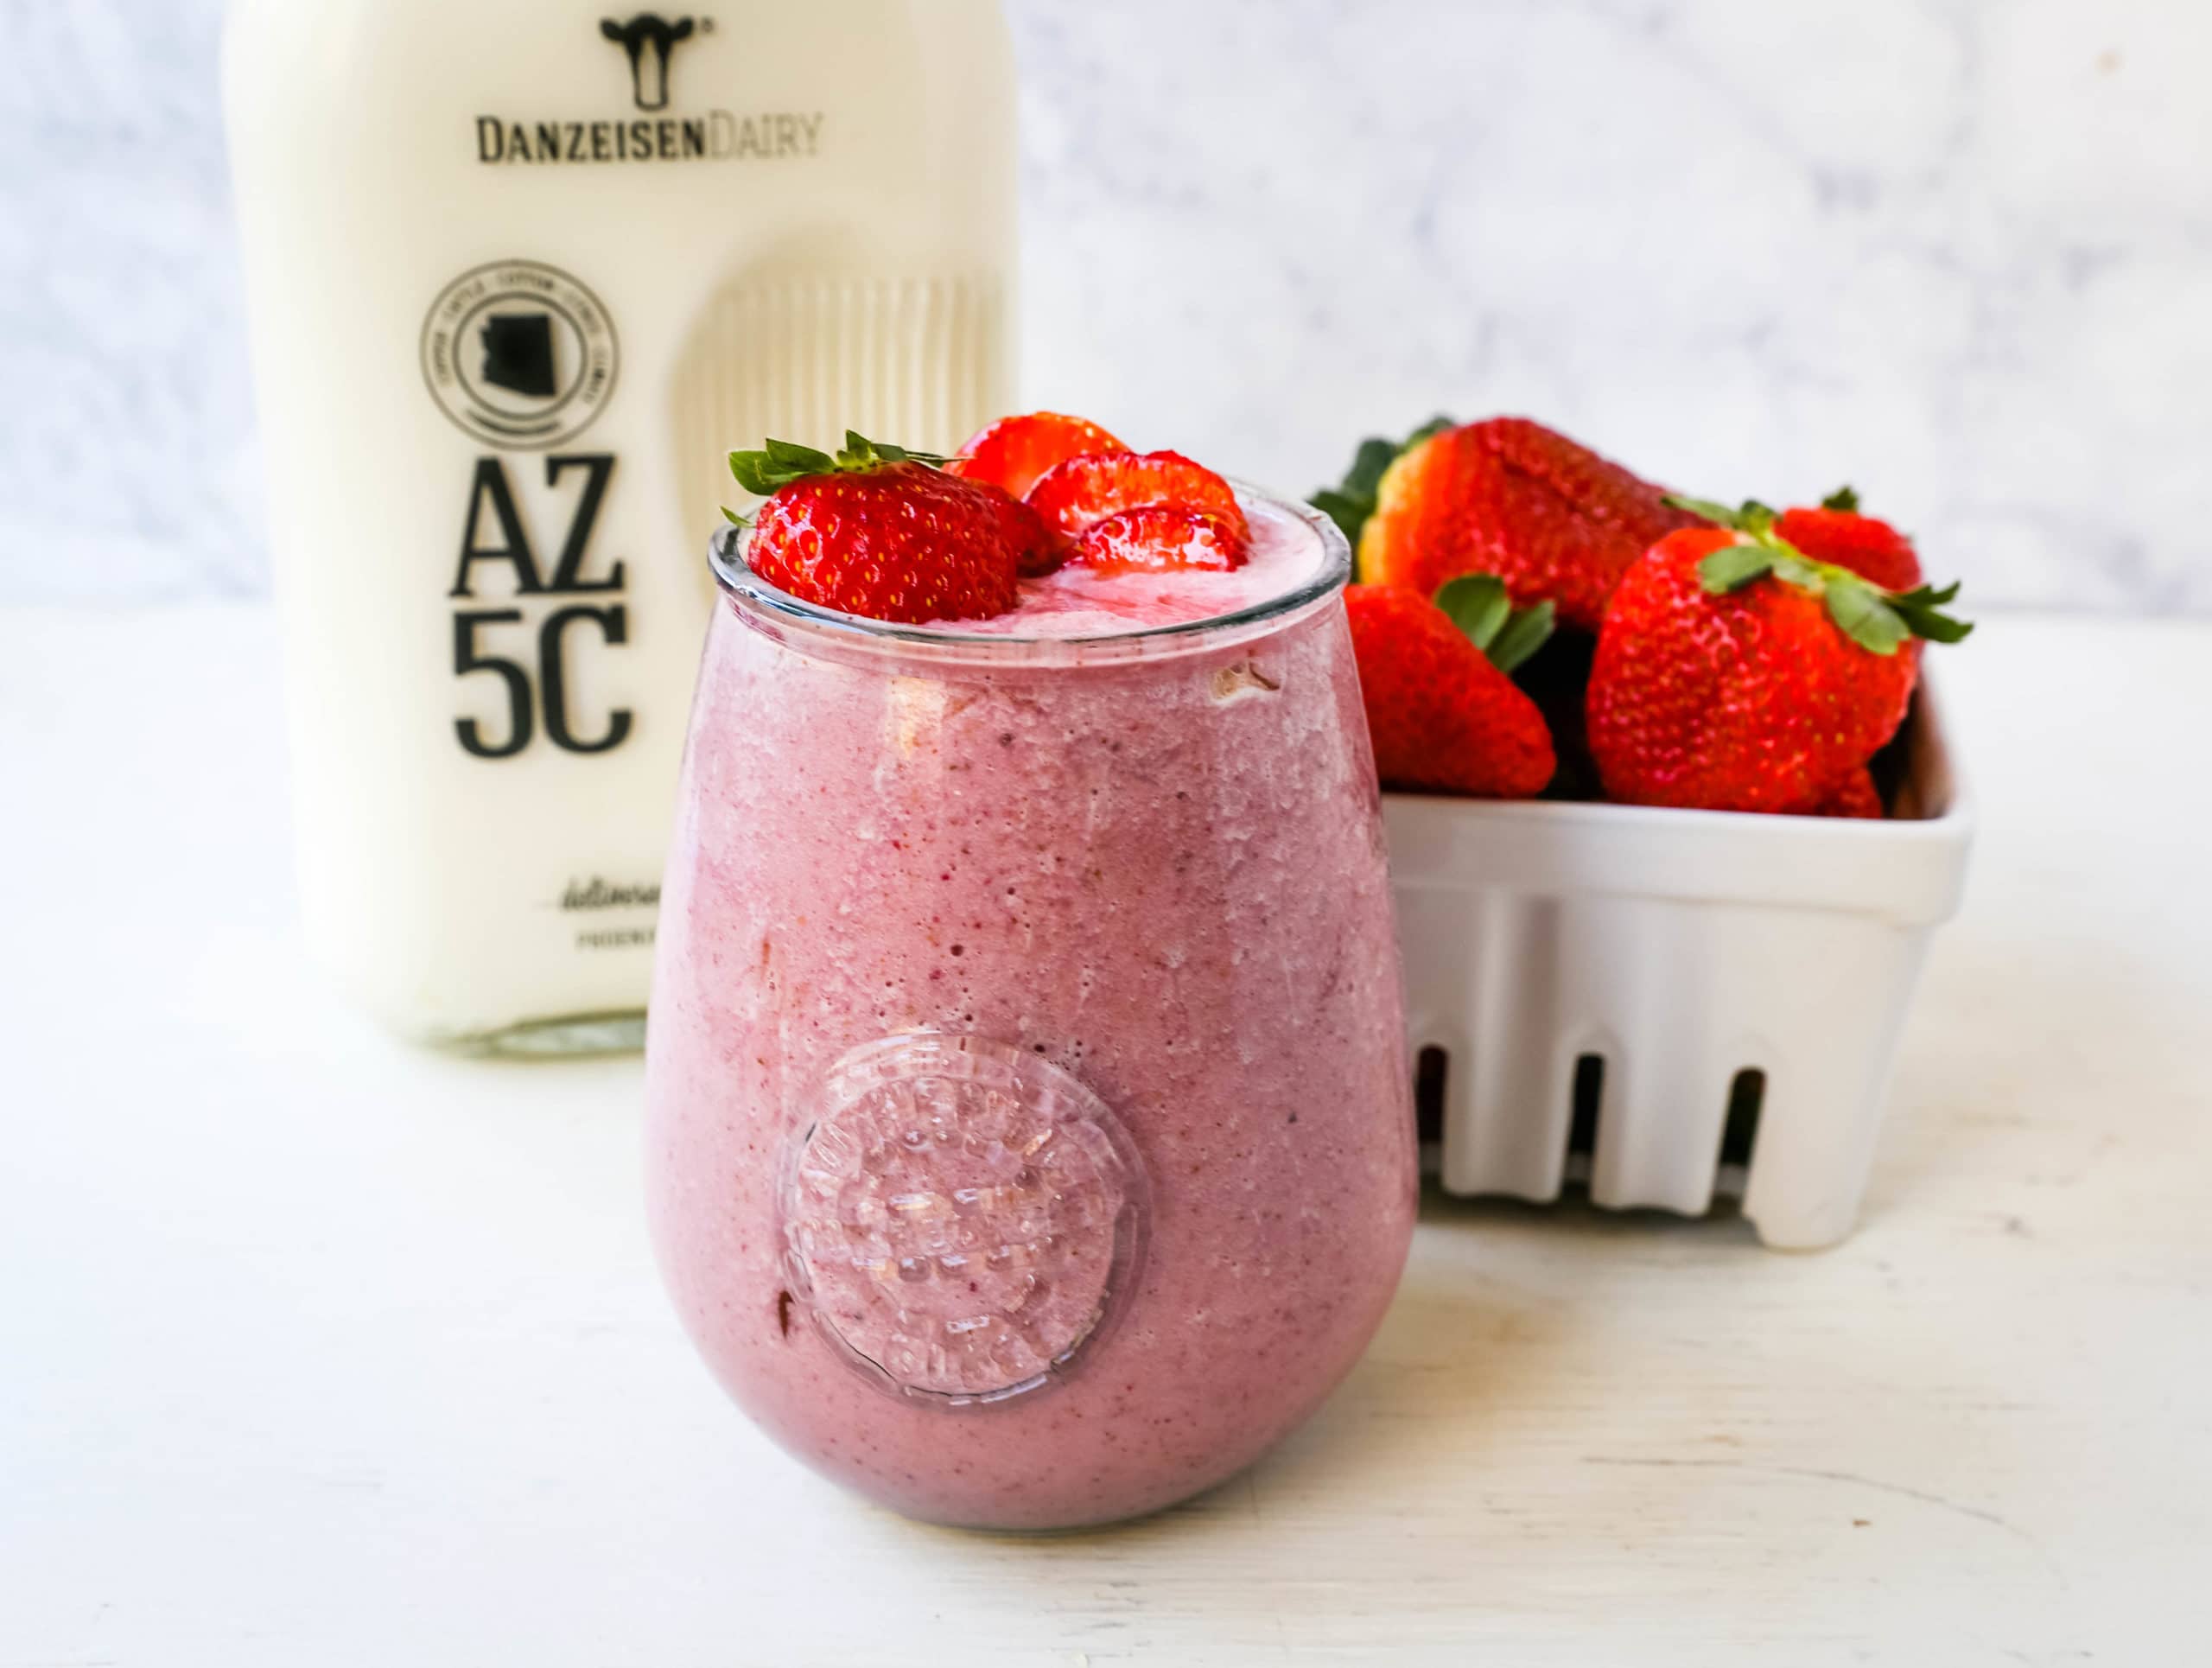 Strawberry Banana Smoothie. Creamy strawberry banana smoothie made with strawberries, bananas, your favorite type of milk, honey, and almond butter (if you want it extra rich and creamy). www.modernhoney.com #smoothie #smoothies #strawberrysmoothie